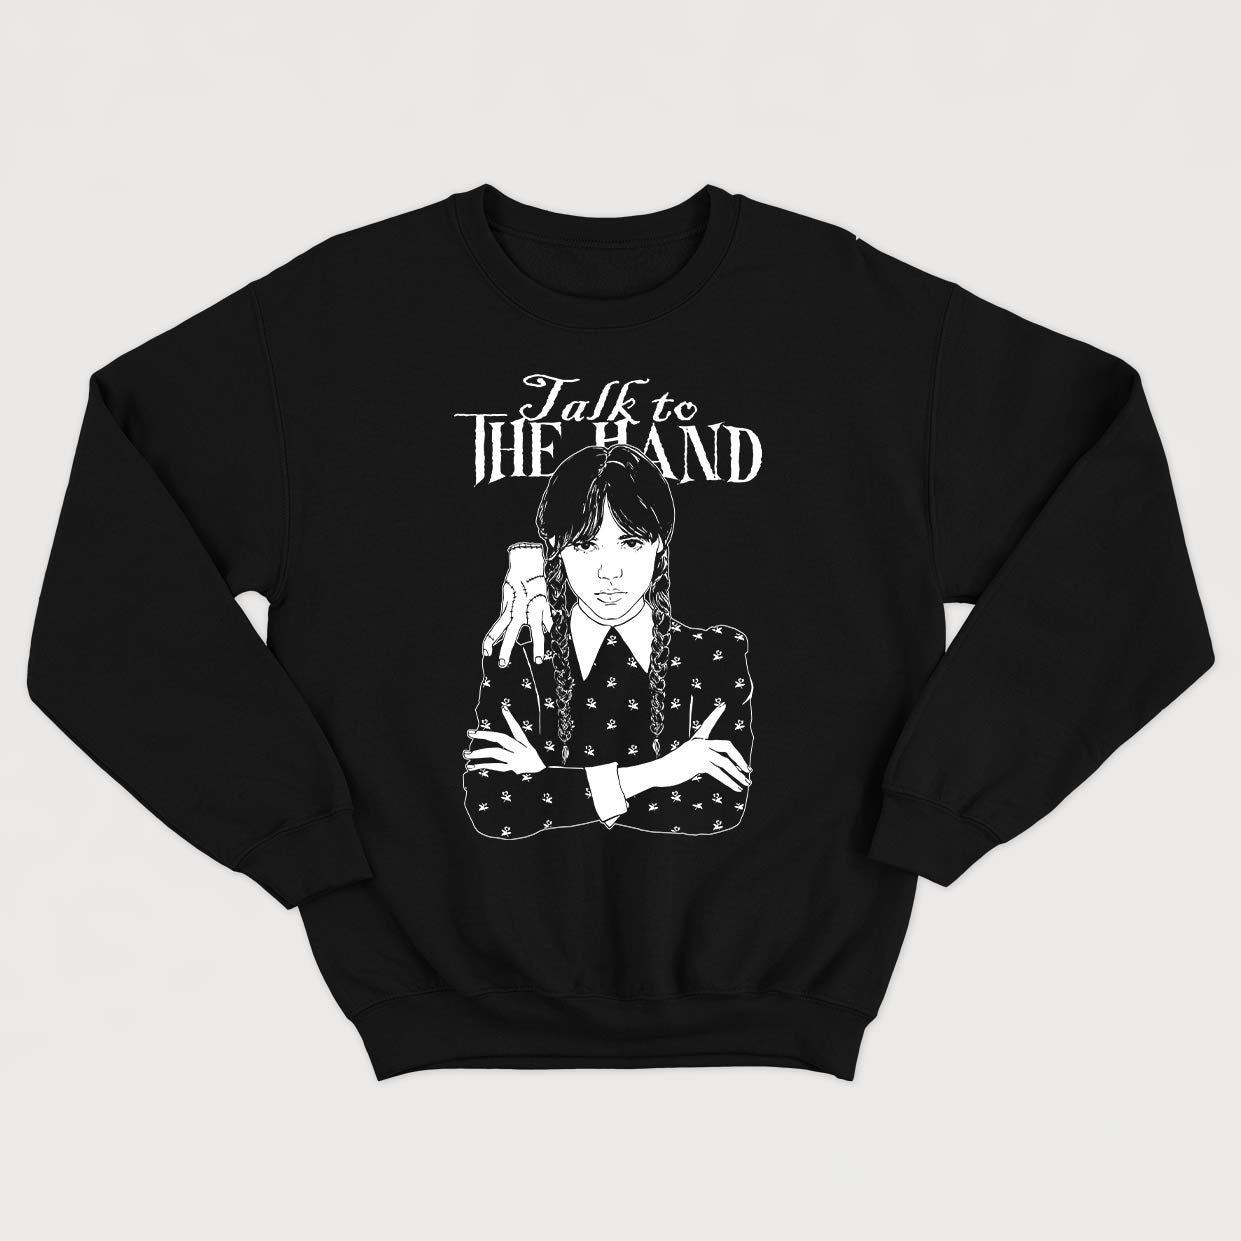 WEDNESDAY ADDAMS TALK TO THE HAND crewneck vintage unisexe - tamelo boutique